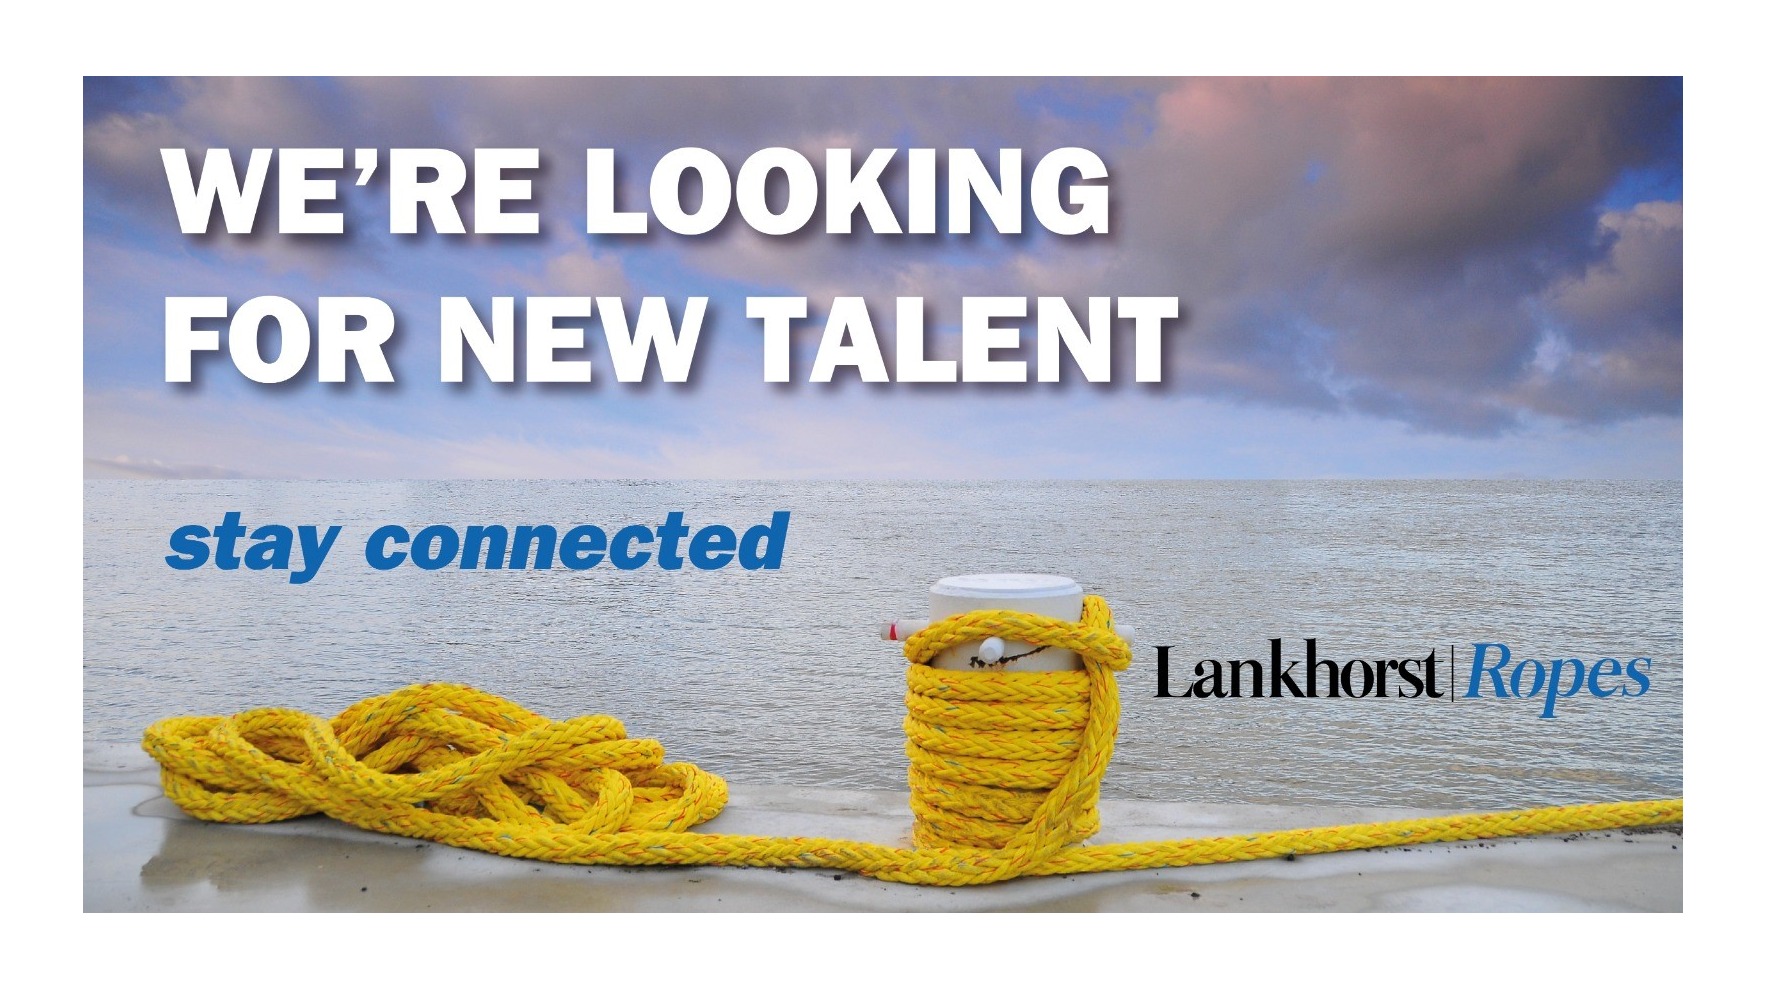 Looking-for-new-talent-at-Lankhorst-Ropes-1